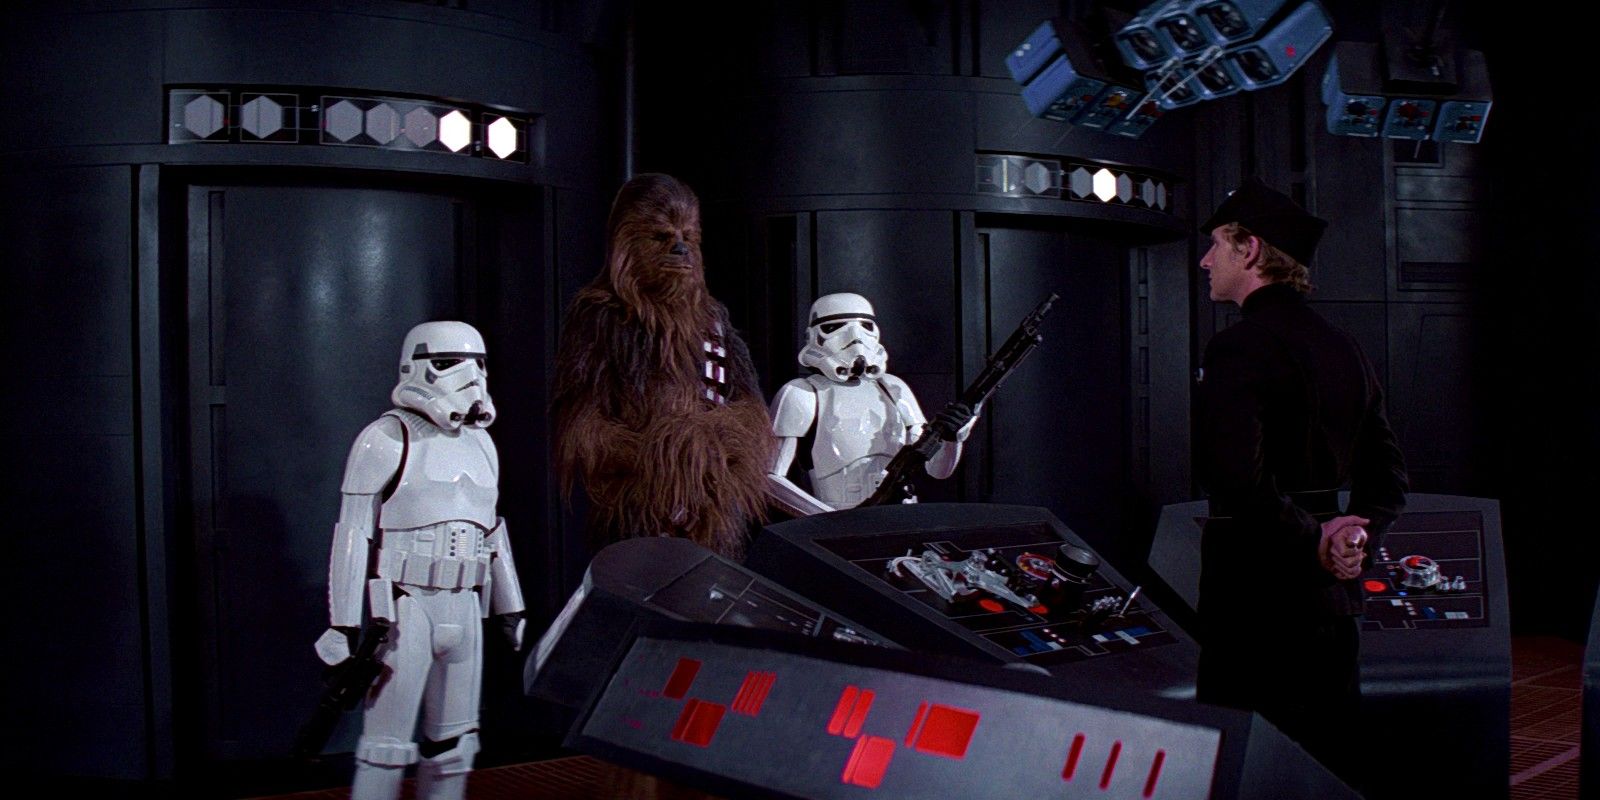 Luke, Han and Chewbacca disguise as stormtroopers in order to rescue Princess Leia Death Star in Star Wars A New Hope